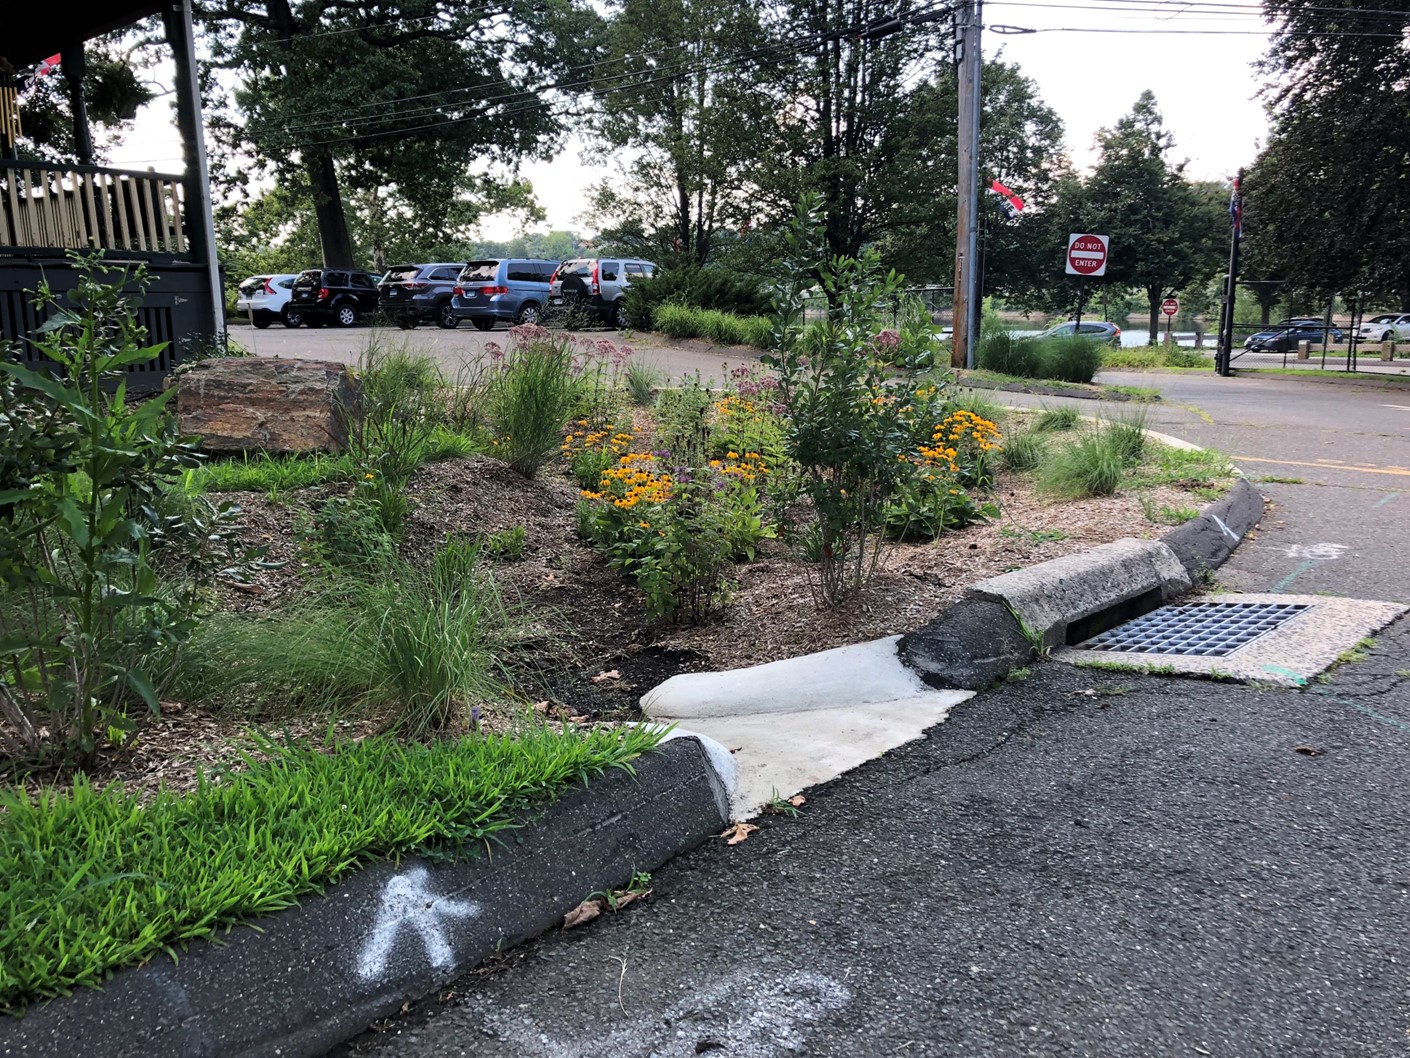 At the Beardsley Park Zoo in Bridgeport, CT stormwater travels through the curb cut into the vegetation of this rain garden for treatment instead of directly entering the storm drain.